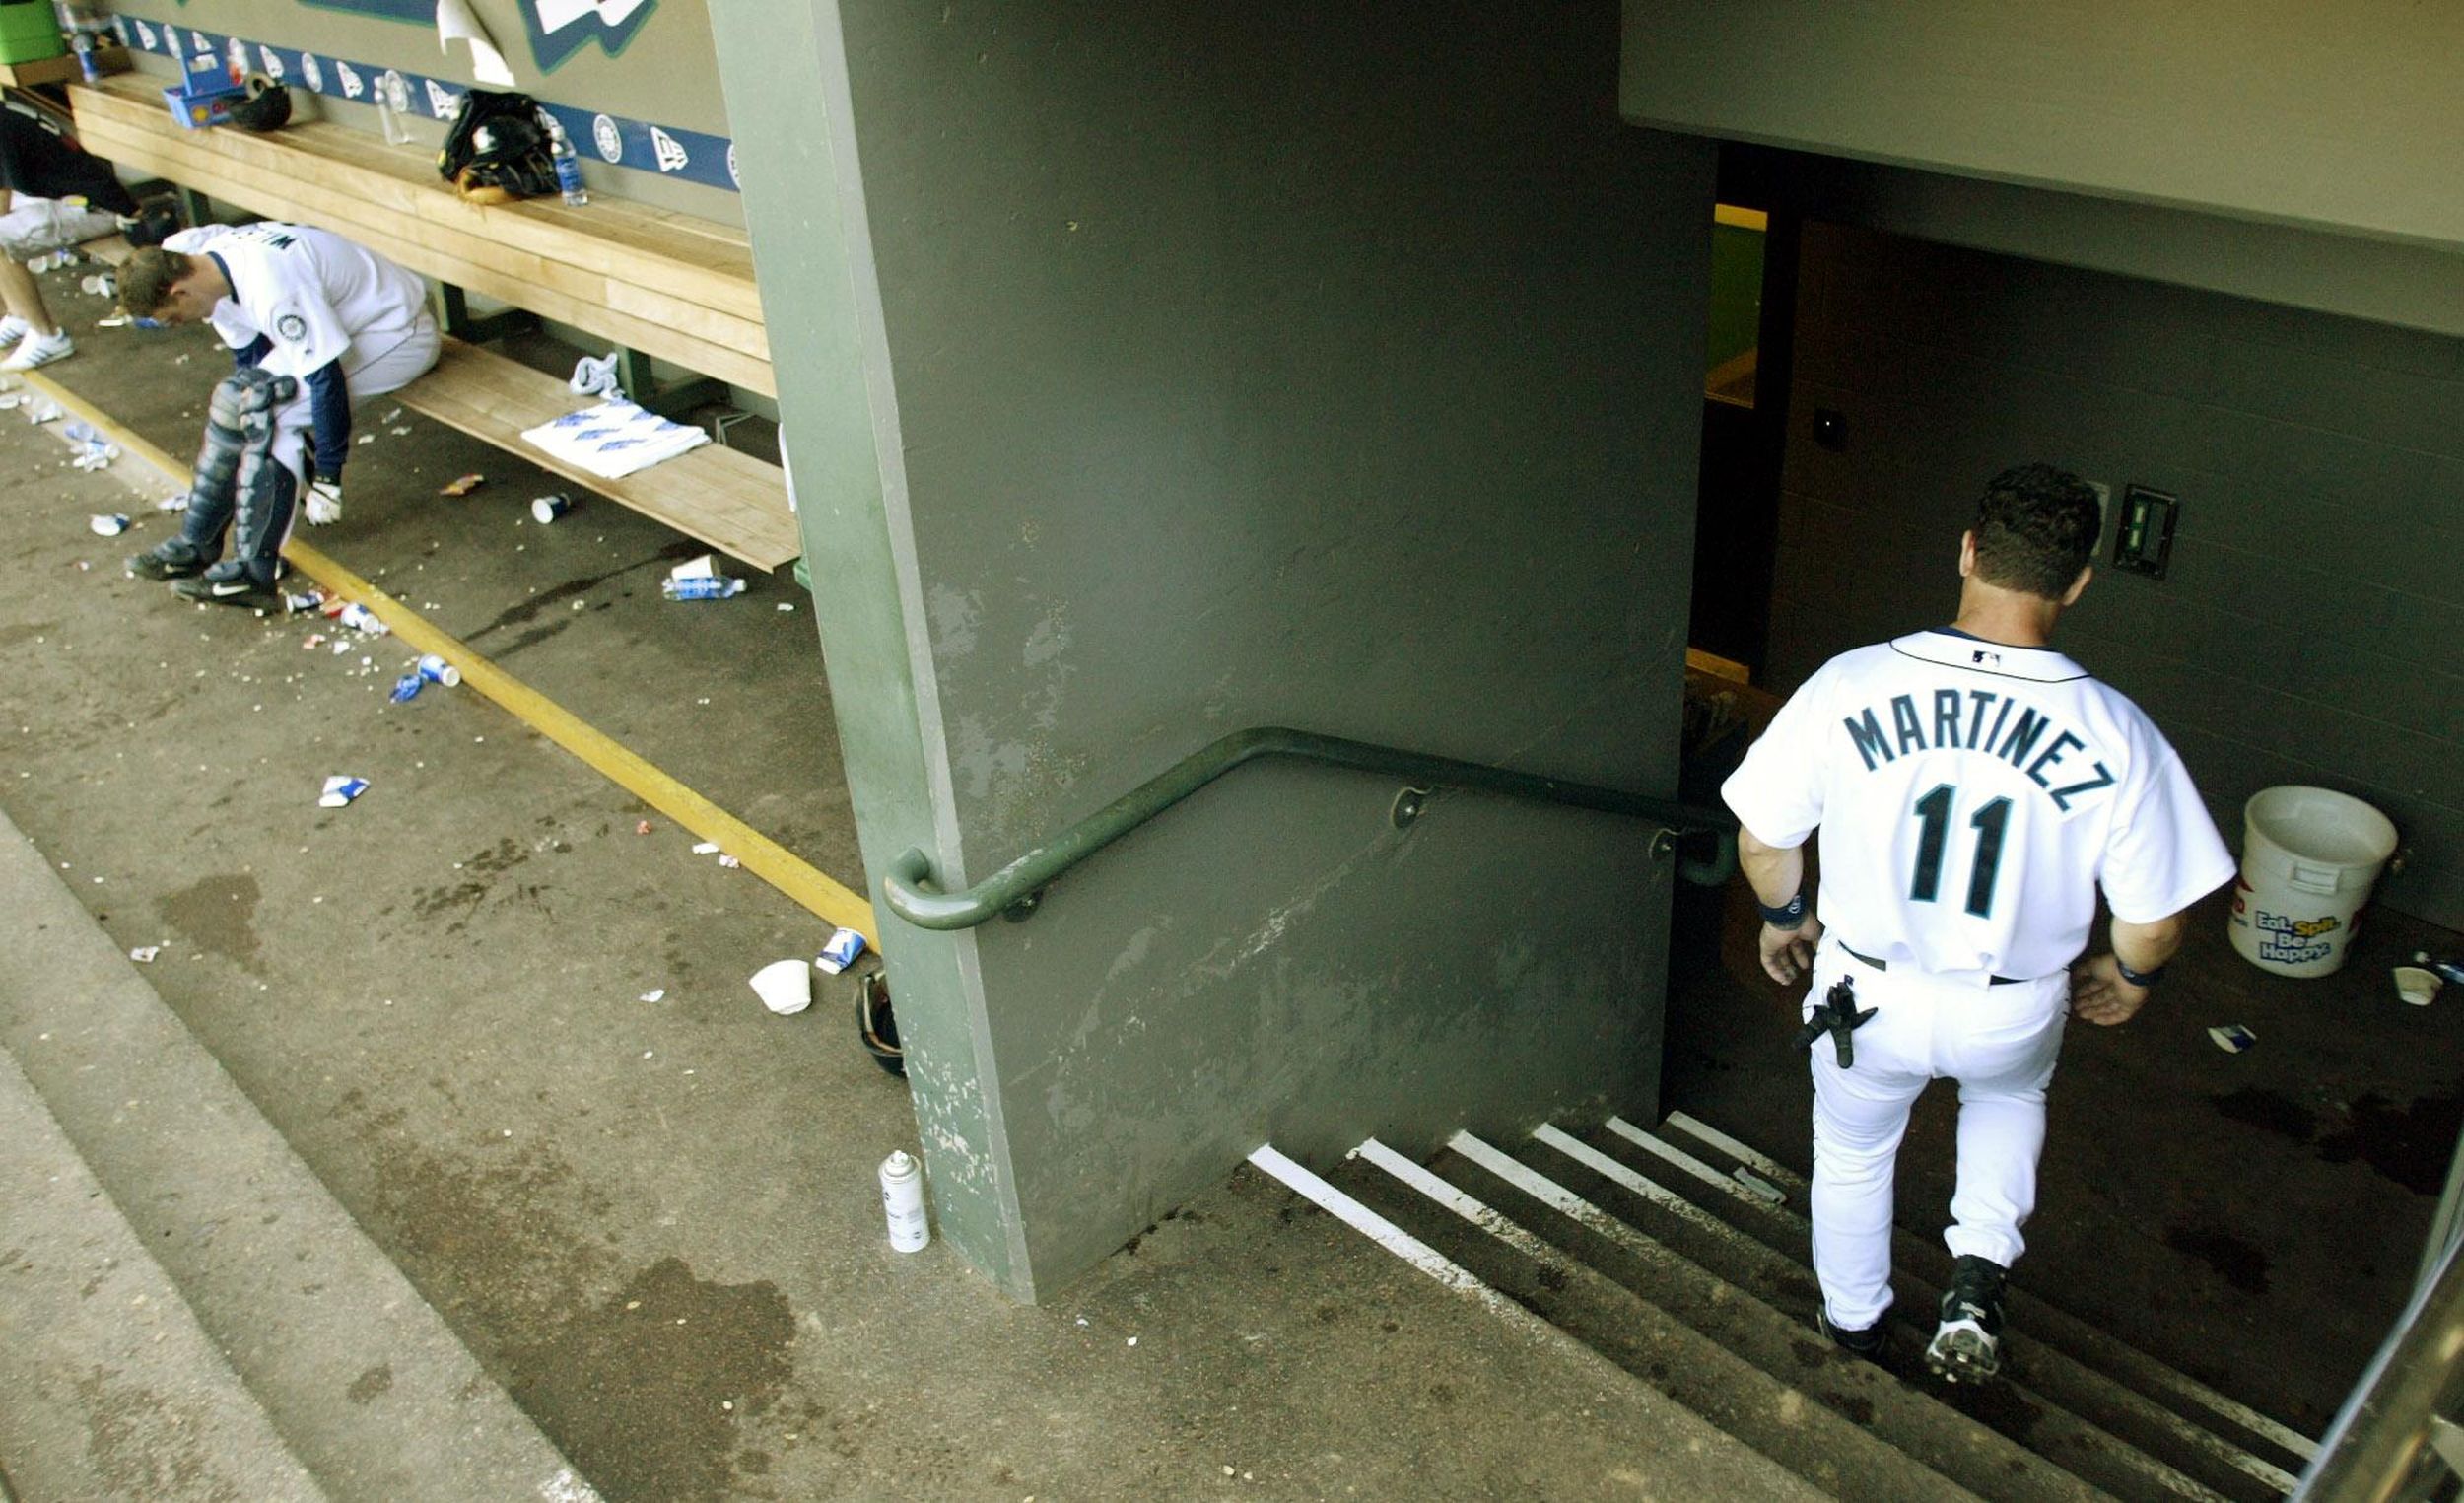 Edgar Martinez: Where is the Seattle Mariners' legend now? - BVM